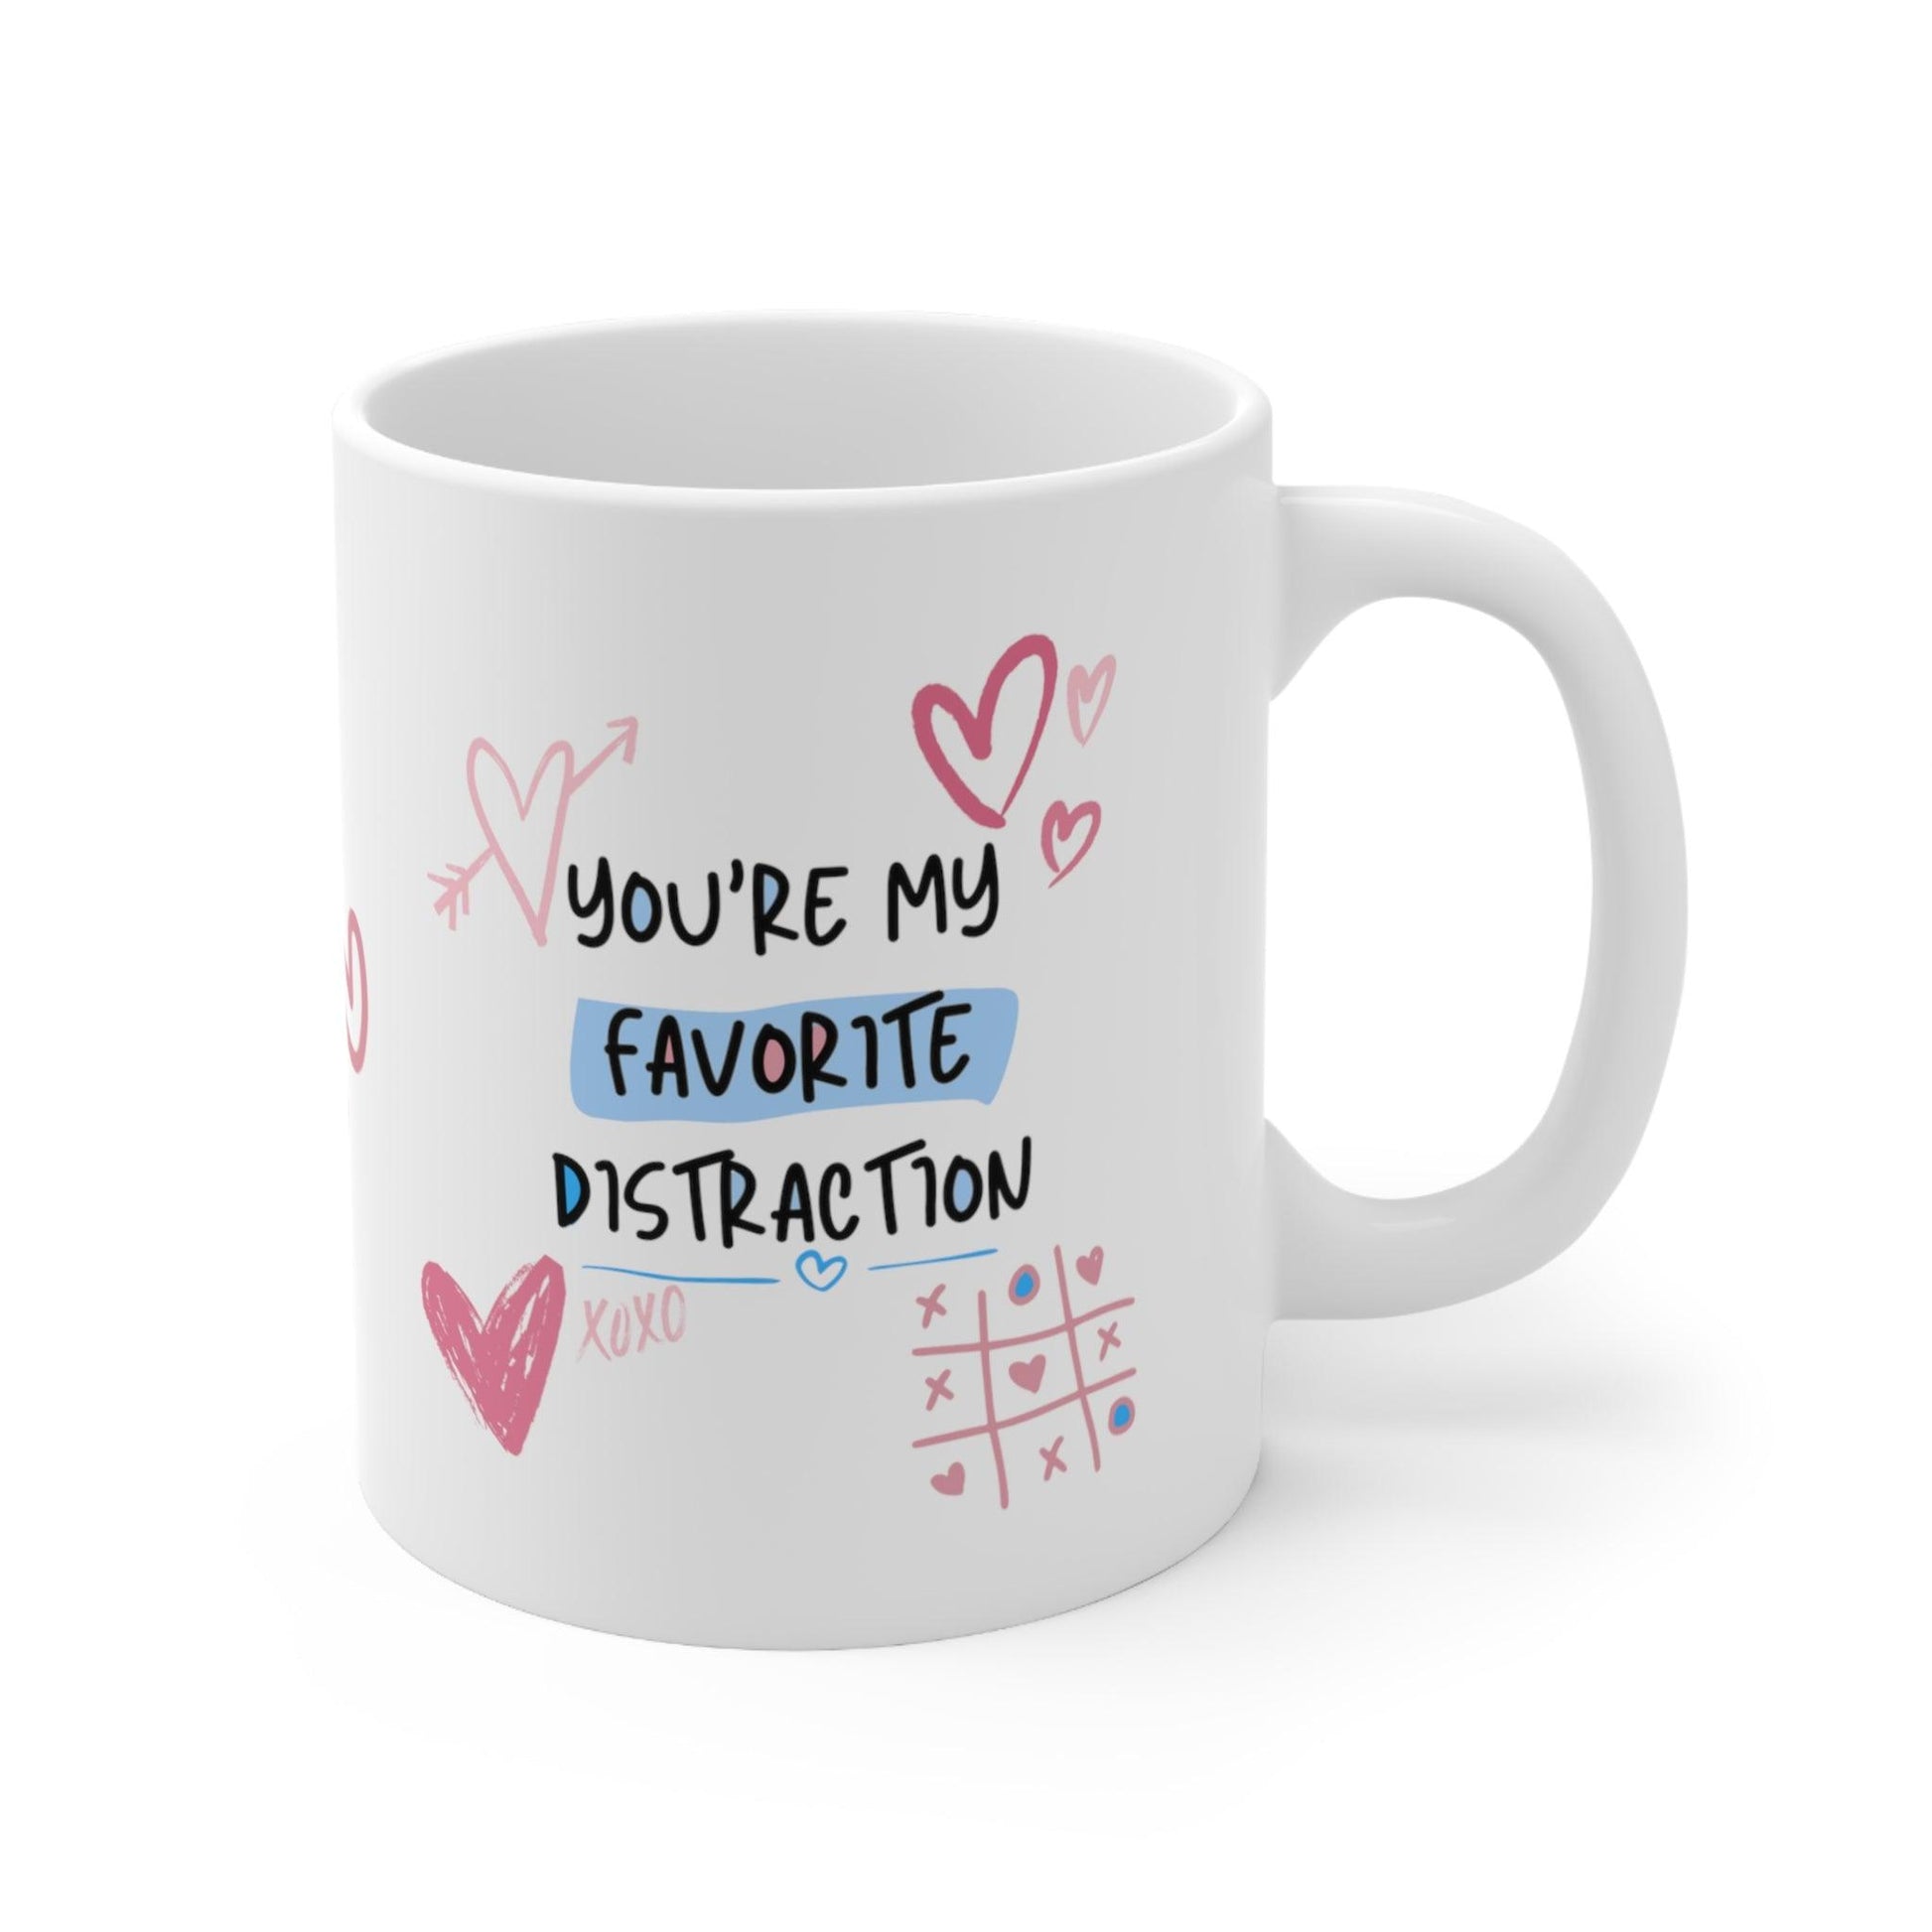 You're My Favorite Distraction - Cosy Valentine's ADHD Mug - Fidget and Focus